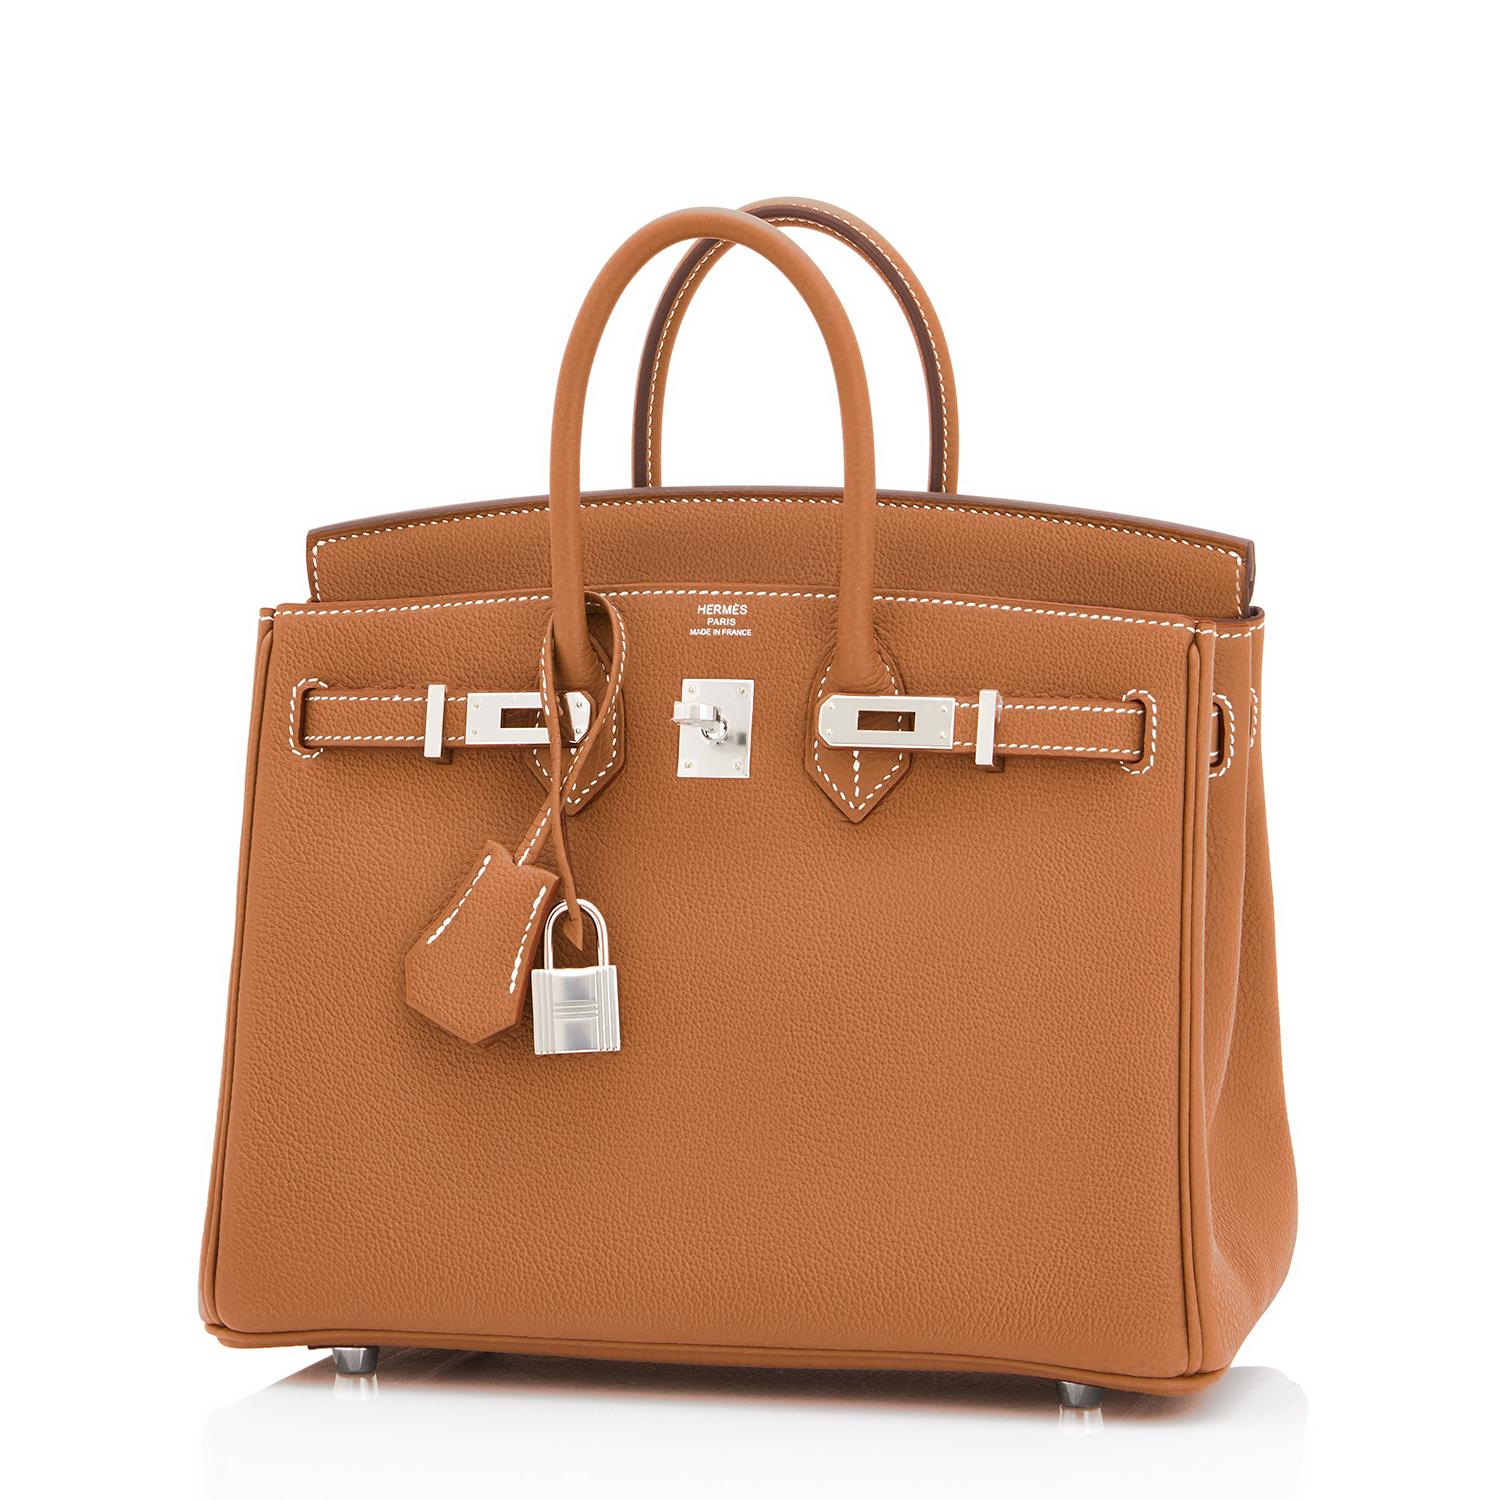 Hermes Birkin 25cm Gold and Gris Tourterelle Verso Limited Edition Bag Y Stamp, 2020
Gorgeous Limited Edition Verso Baby Birkin from Hermes offered to Hermes VIPs!
Just purchased from Hermes store! Bag bears new interior 2020 stamp.
Brand New in